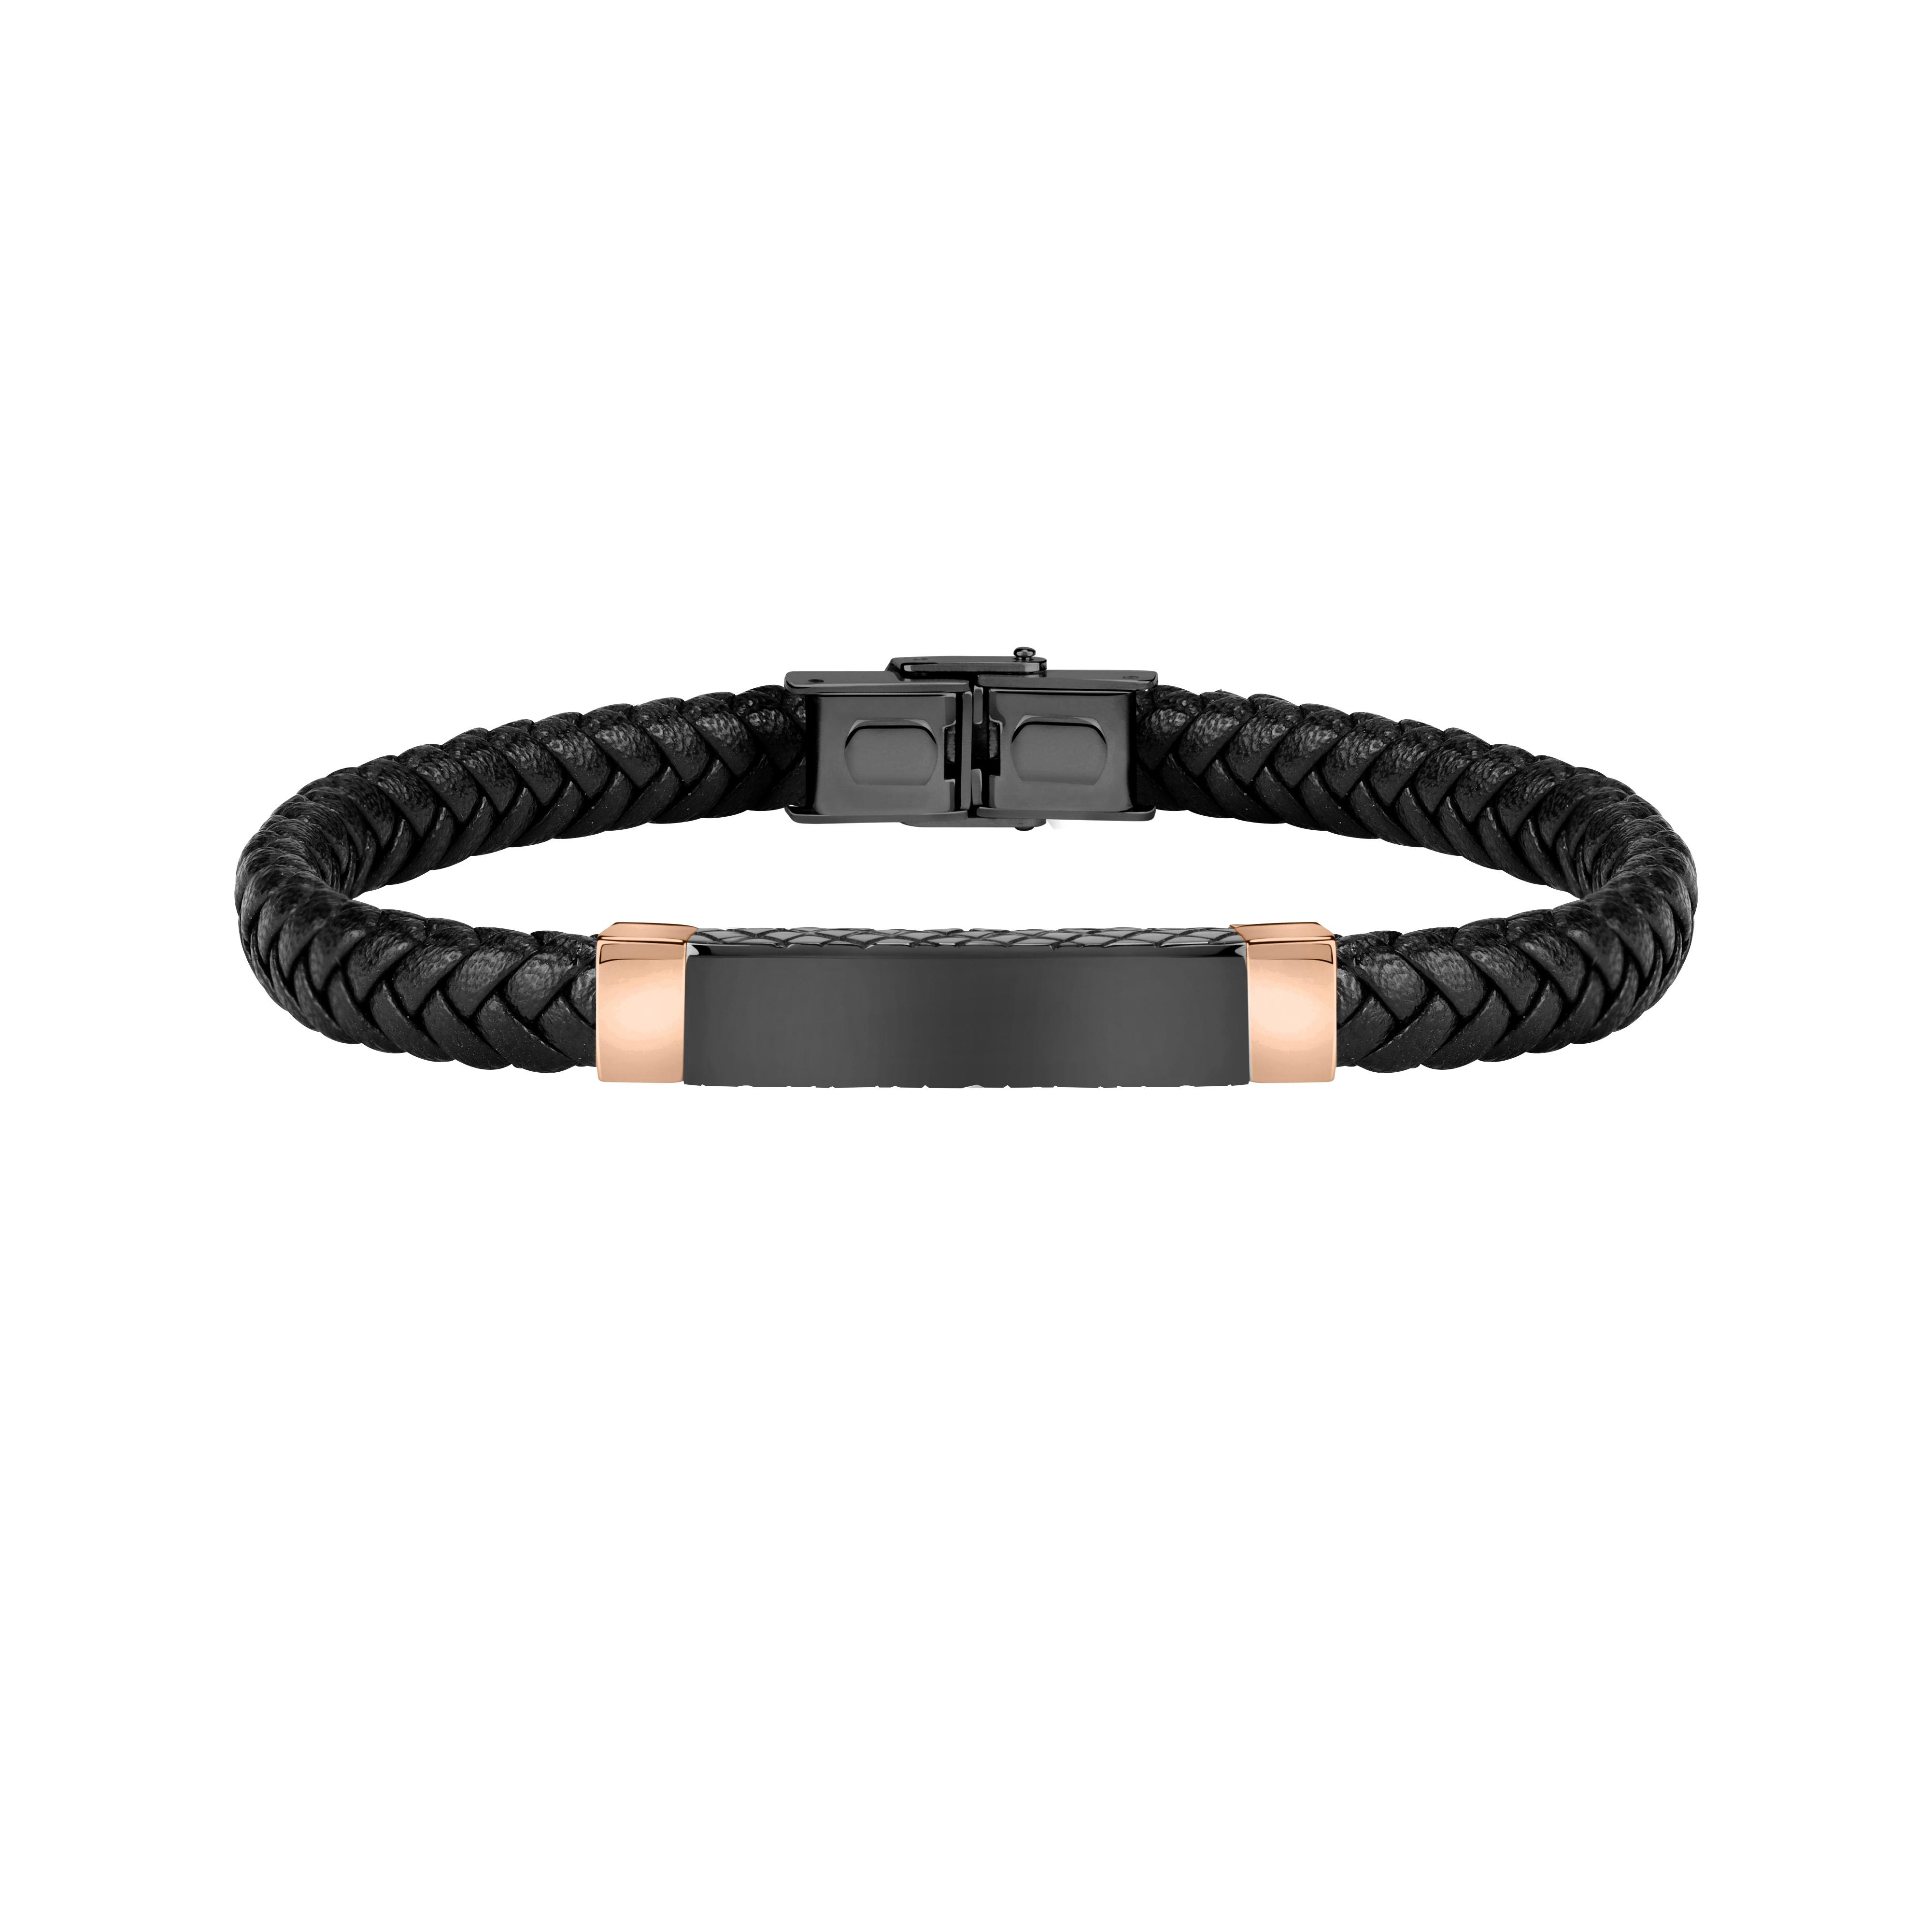 Jewelry: Sector steel Man Bandy and SZV52 leather collection bracelet